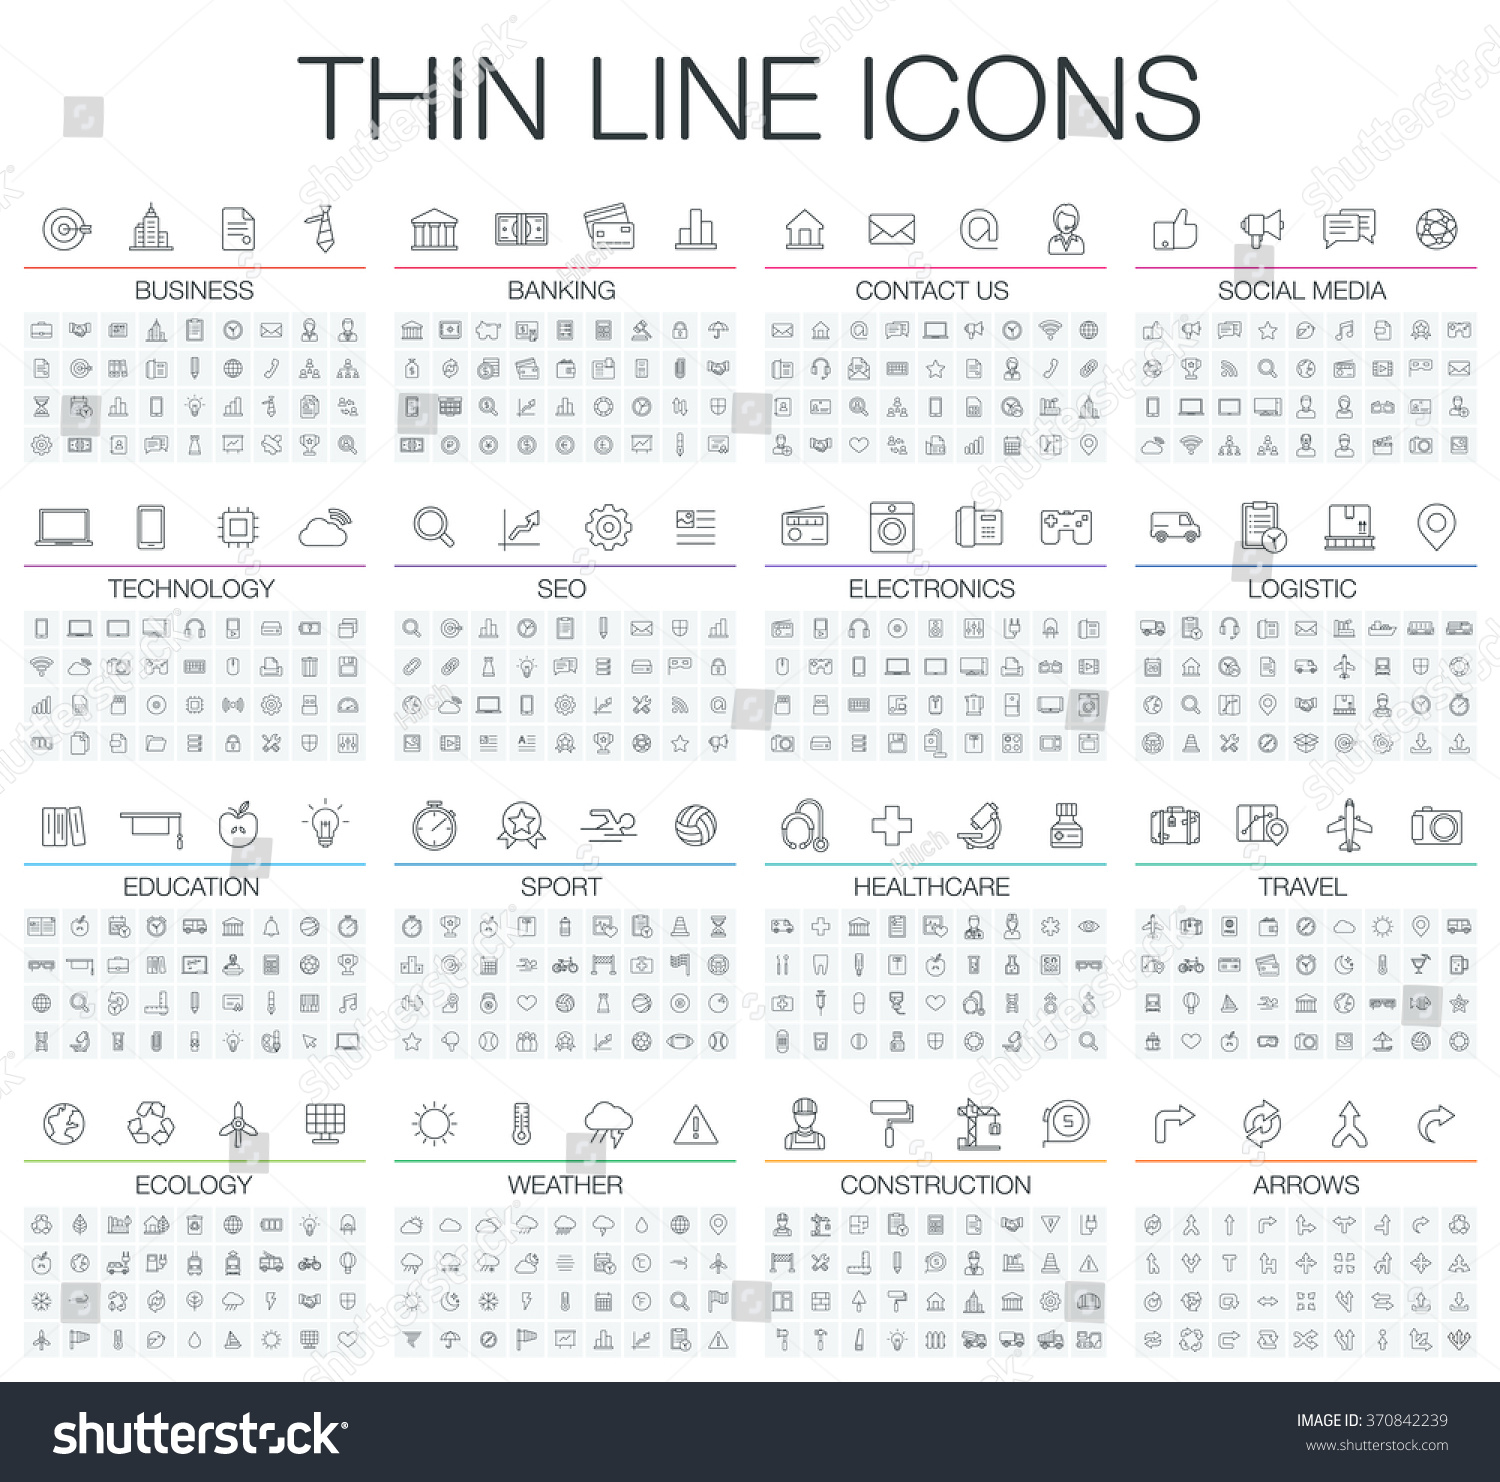 Vector illustration of thin line icons for business, banking, contact, social media, technology, seo, logistic, education, sport, medicine, travel, weather, construction, arrow. Linear symbols set. #370842239